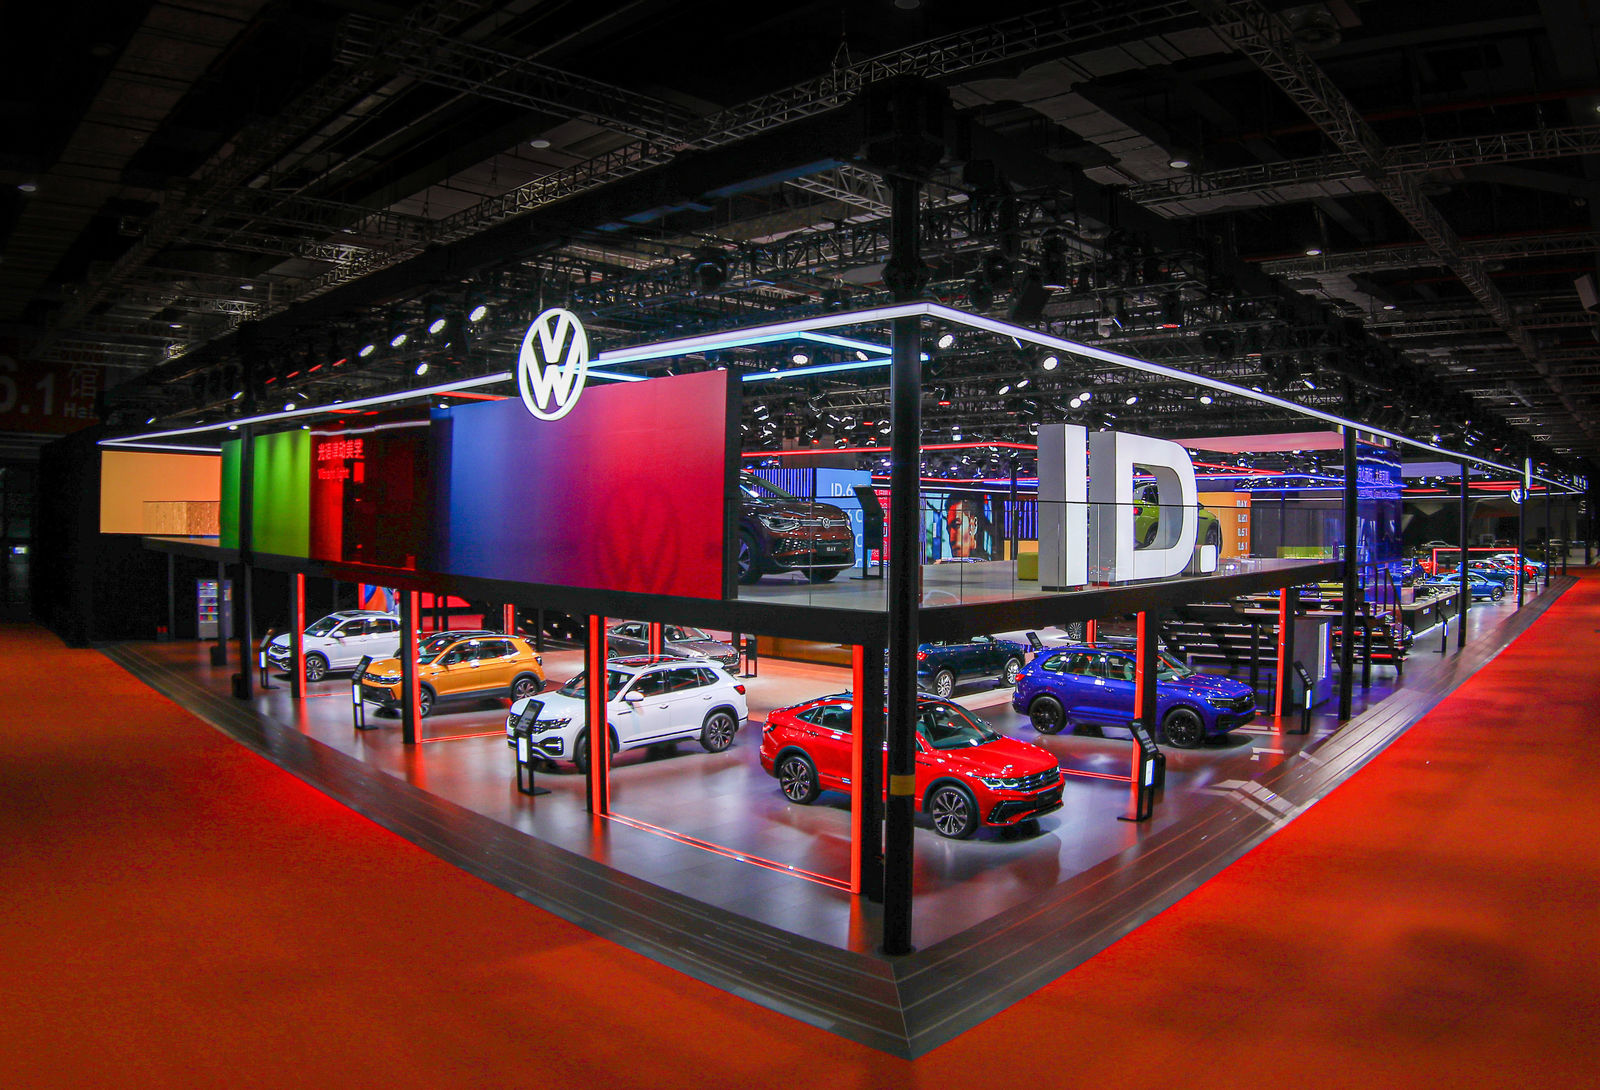 SUV offensive in China: Volkswagen reveals 6 new cars at Auto Shanghai, including 3 world premieres